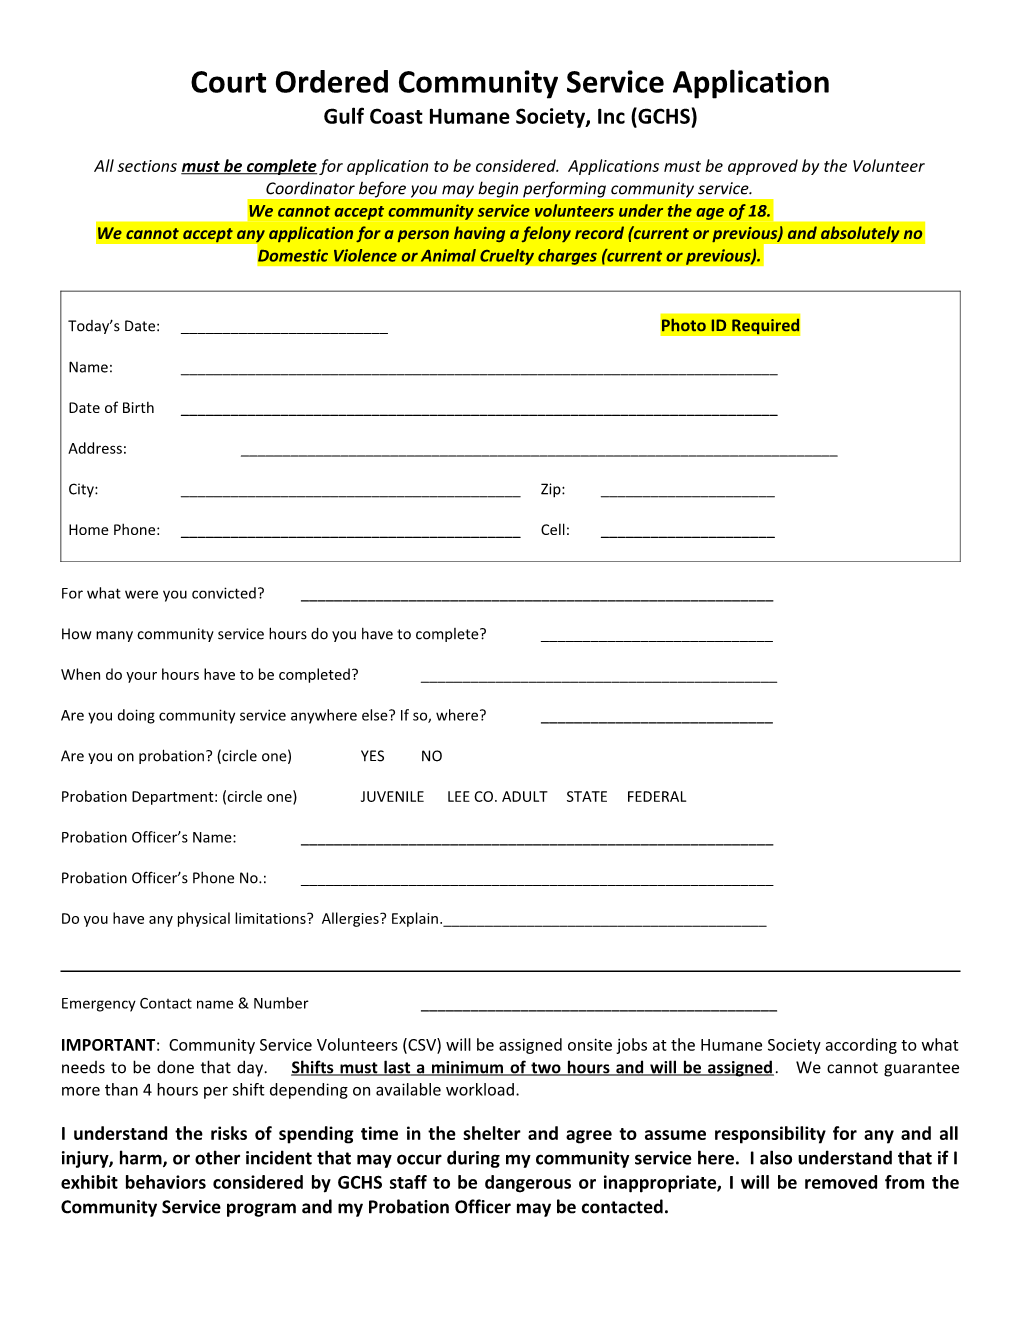 Court Ordered Community Service Application